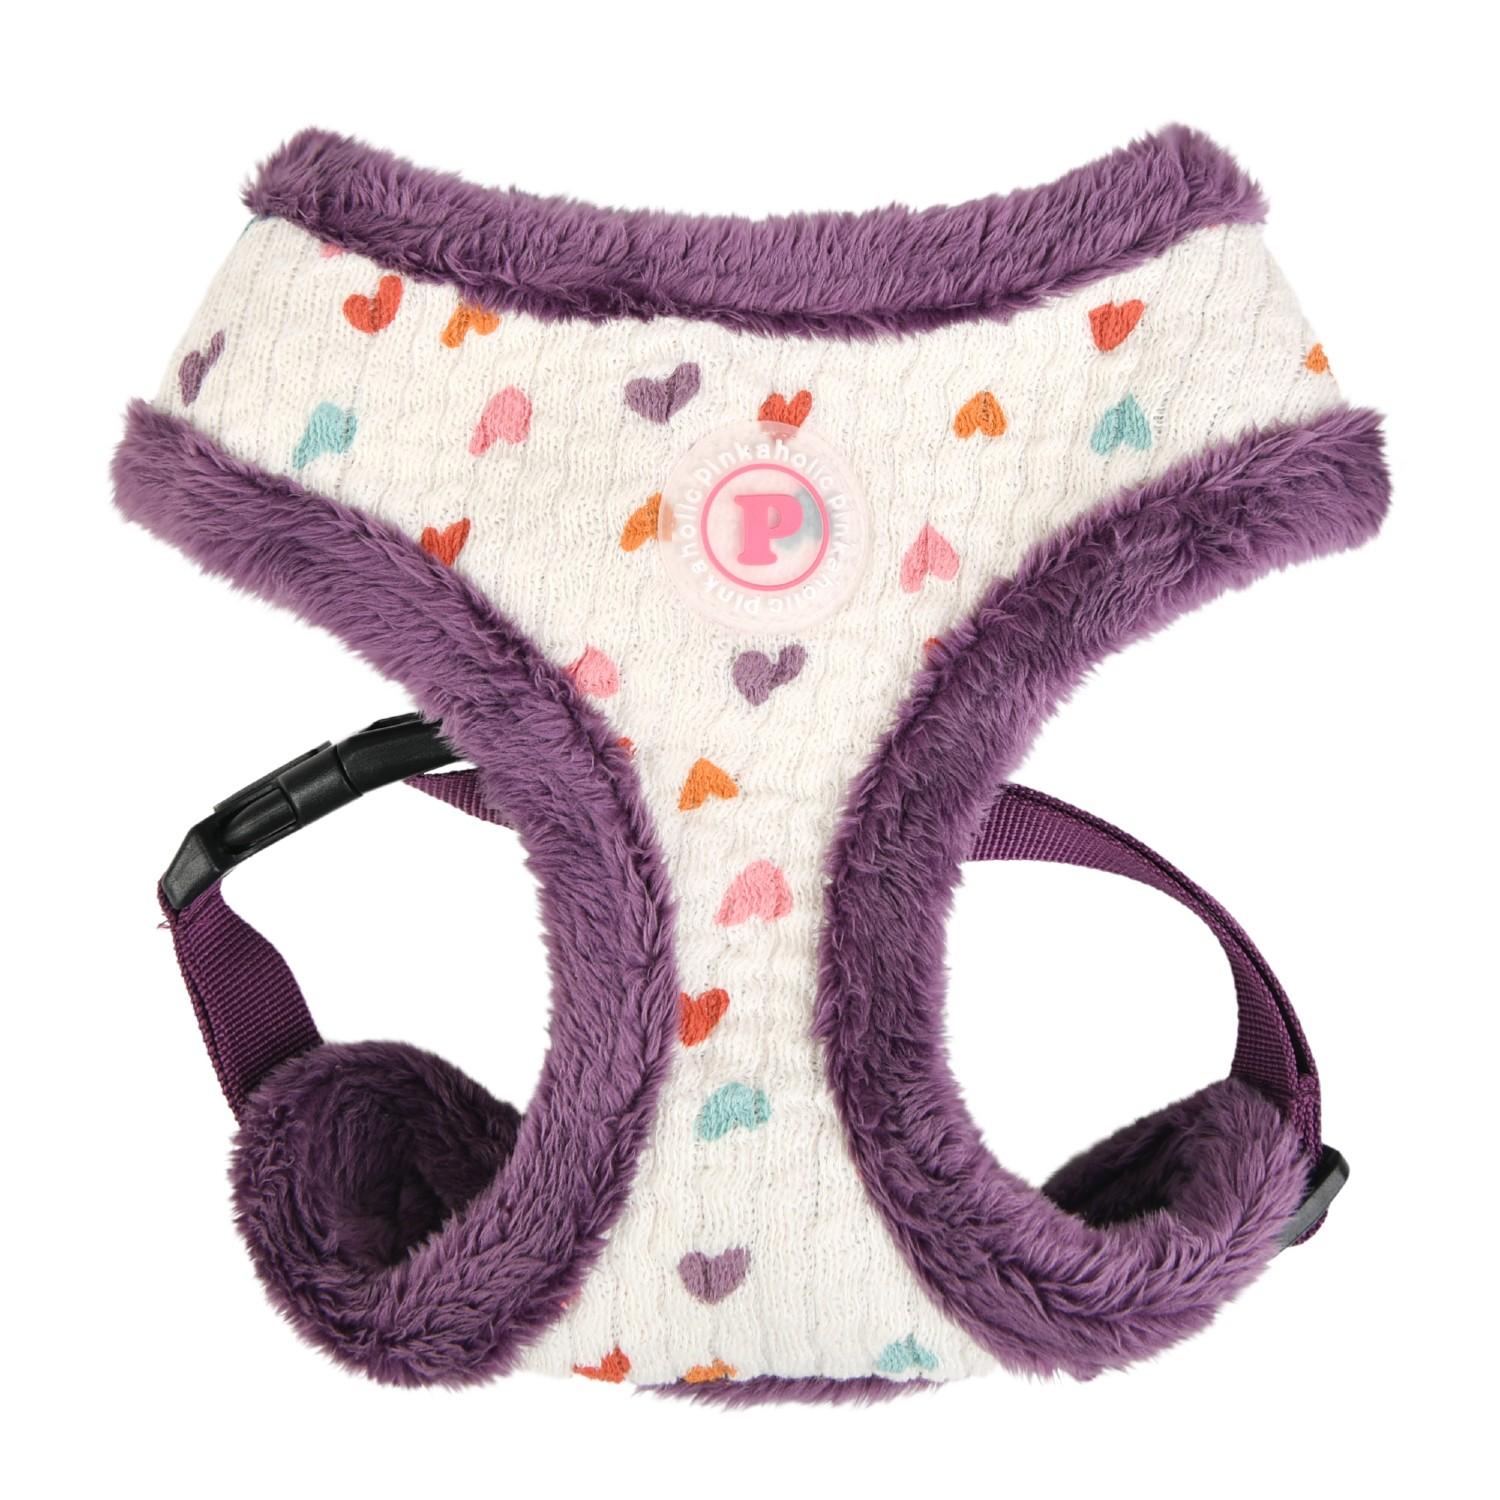 Merry Basic Style Dog Harness by Pinkaholic - Purple